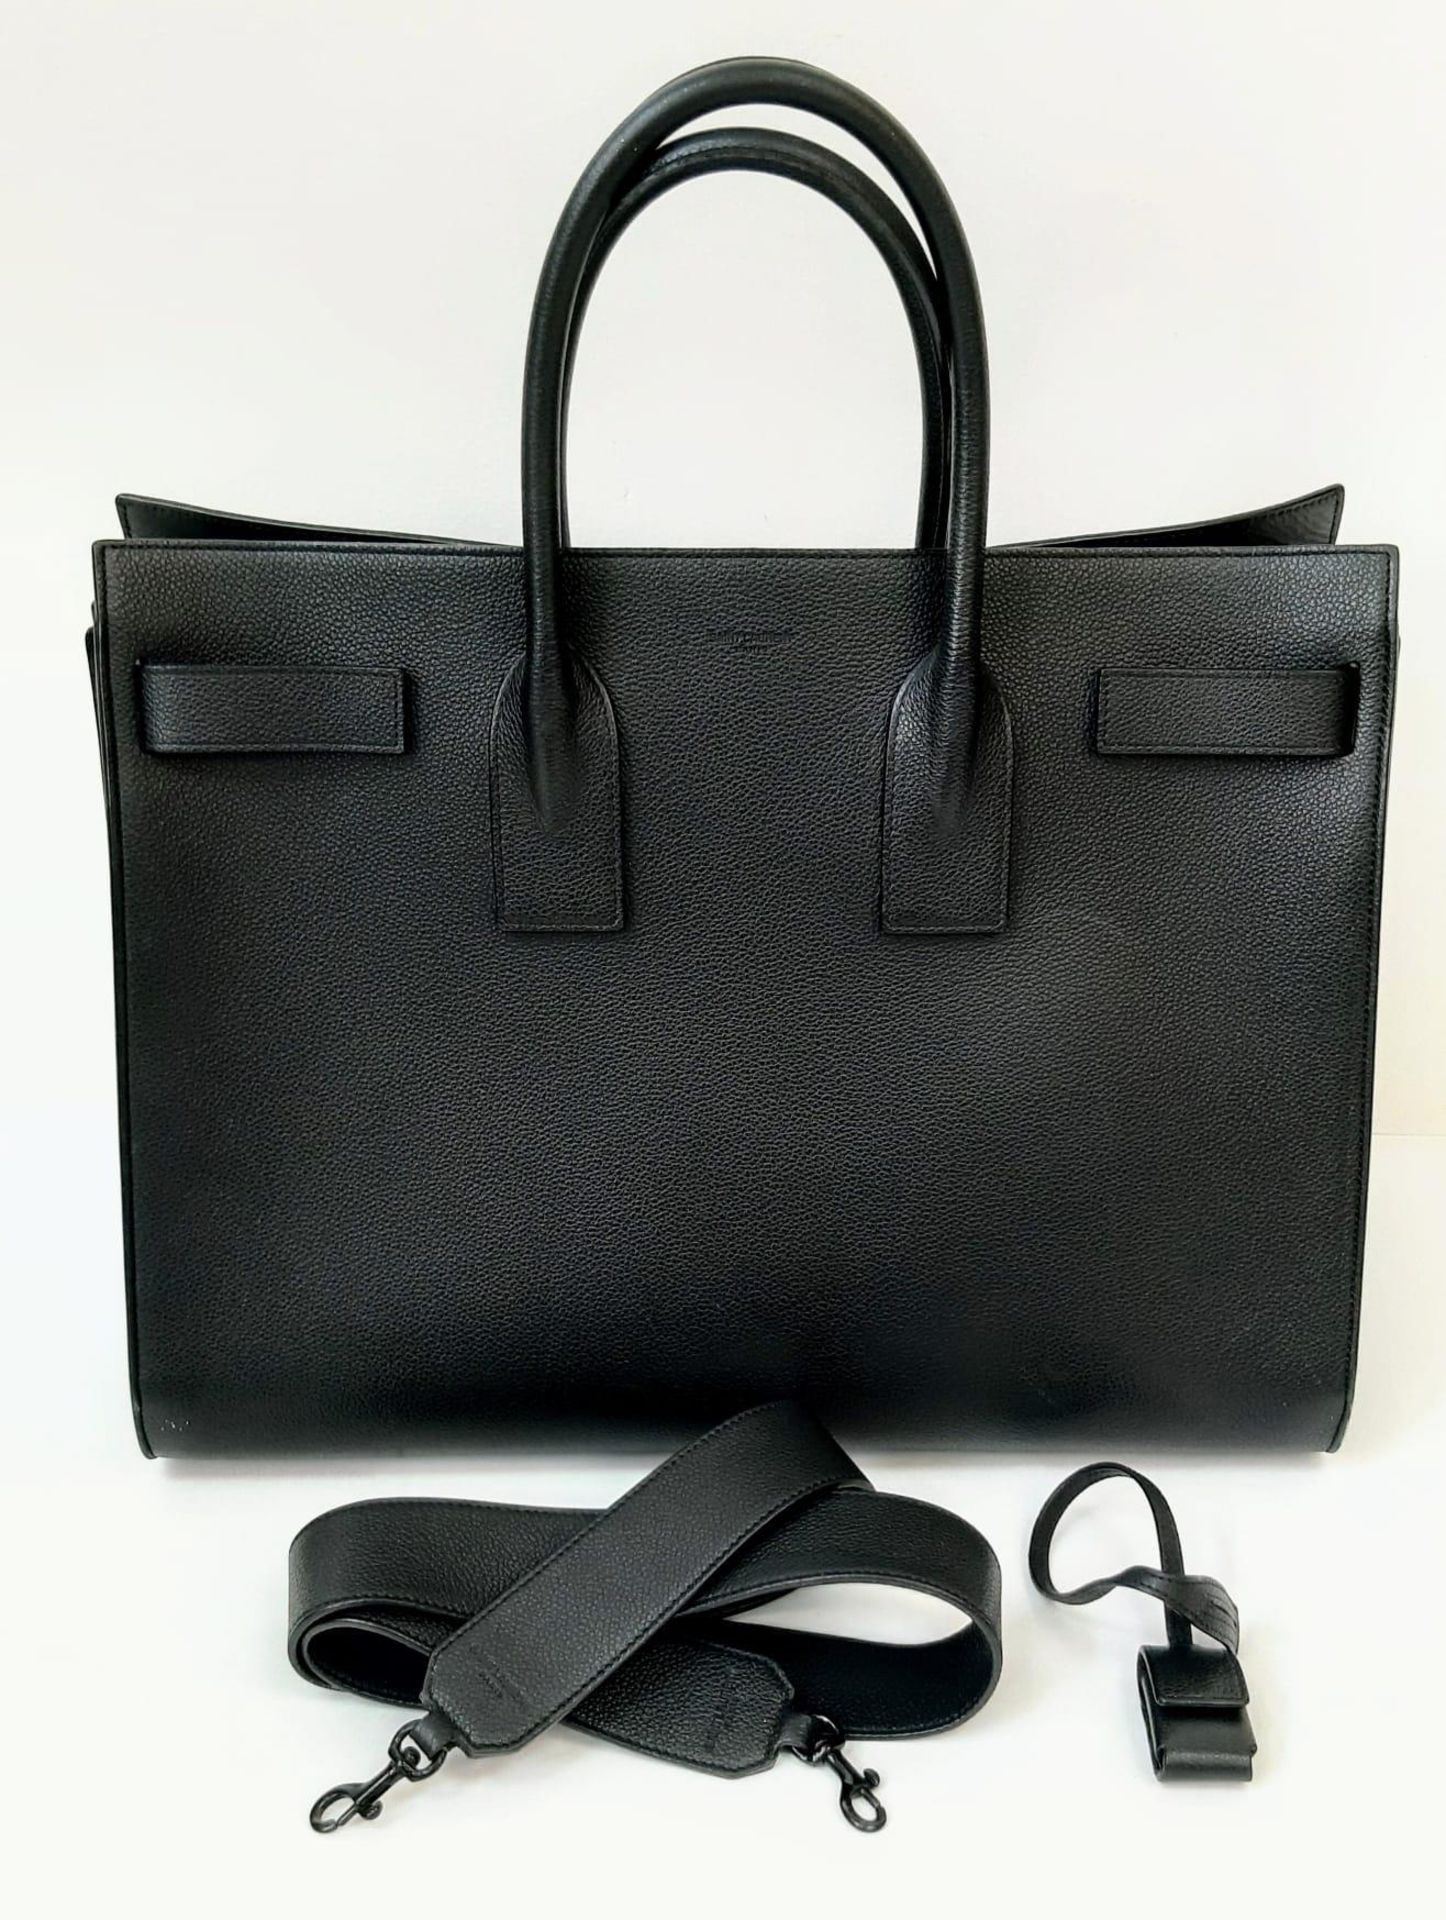 A Classy YSL Black Leather Sac de Jour Tote Bag. Textured calf leather exterior with twin handles.